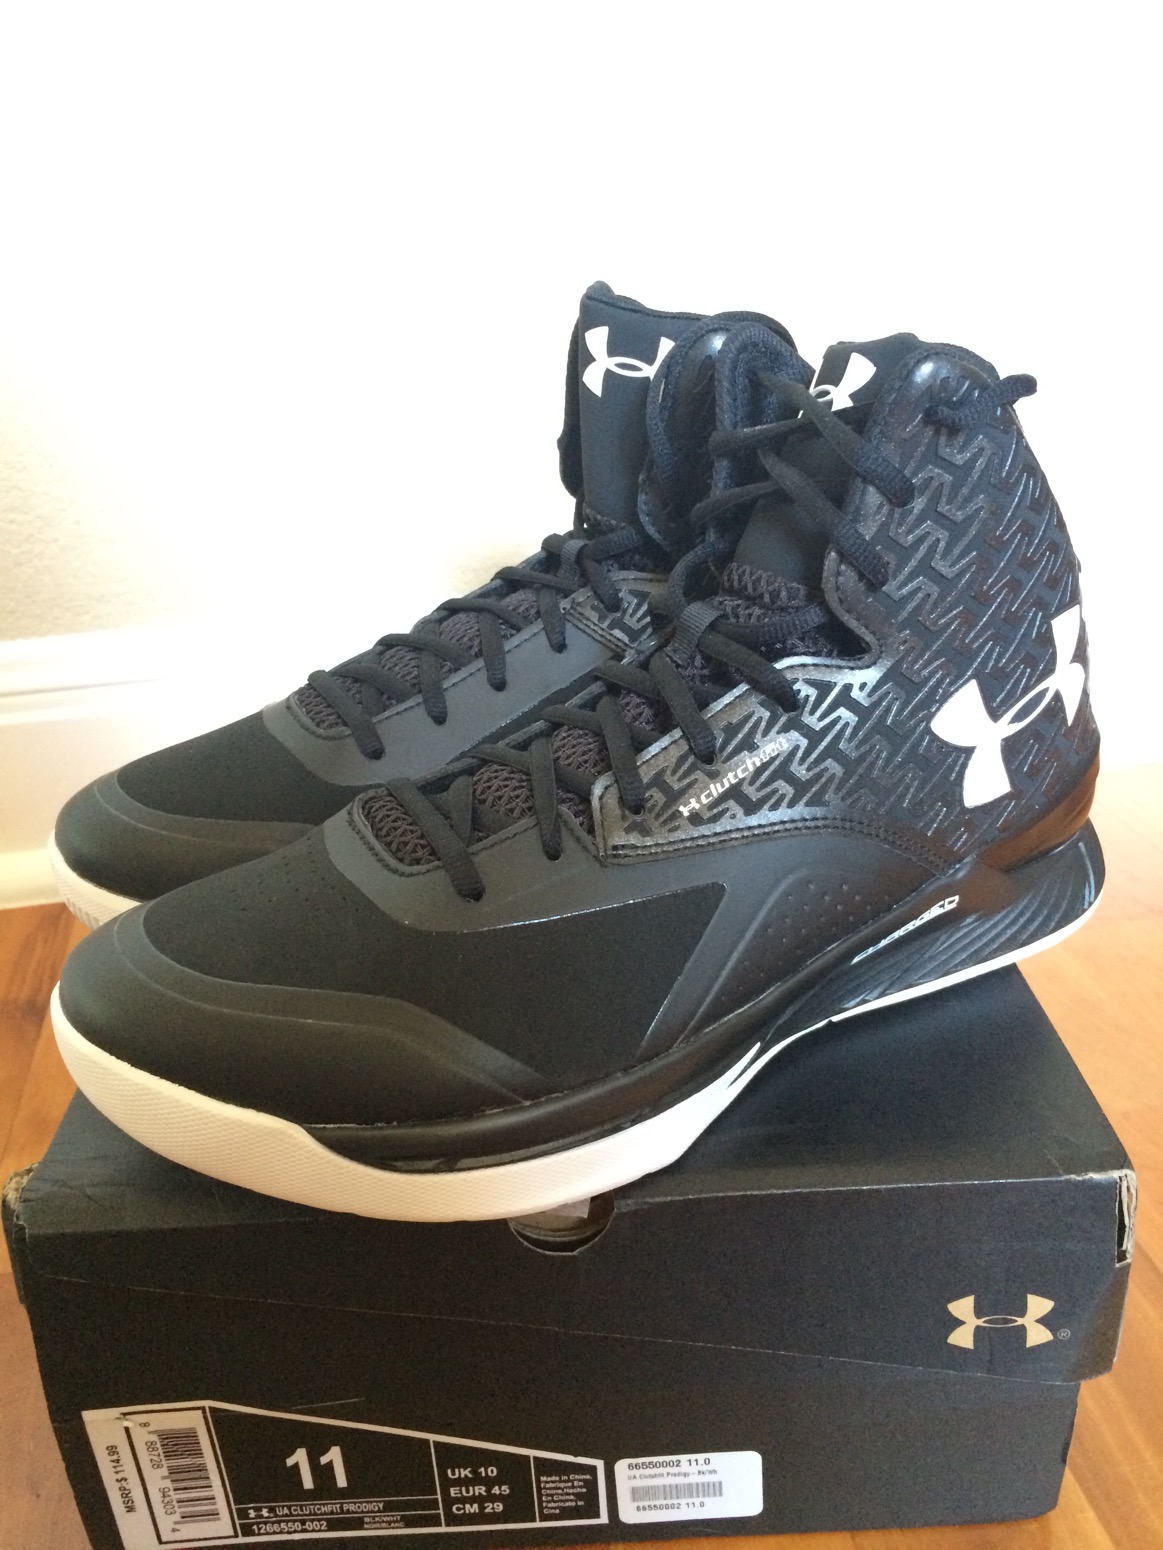 eastbay under armour shoes